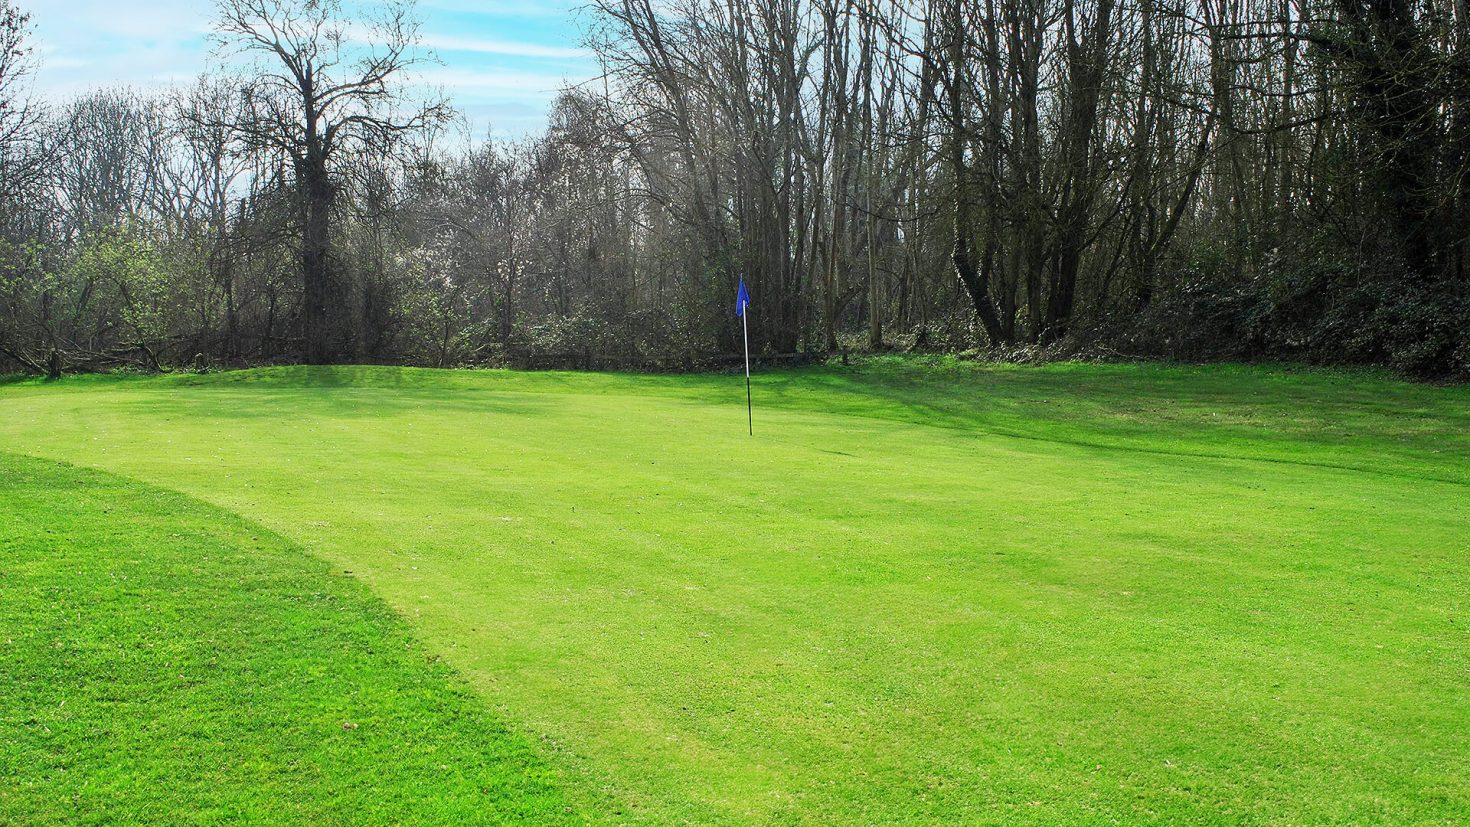 Lullingstone Golf Course - Valley Course Hole 1